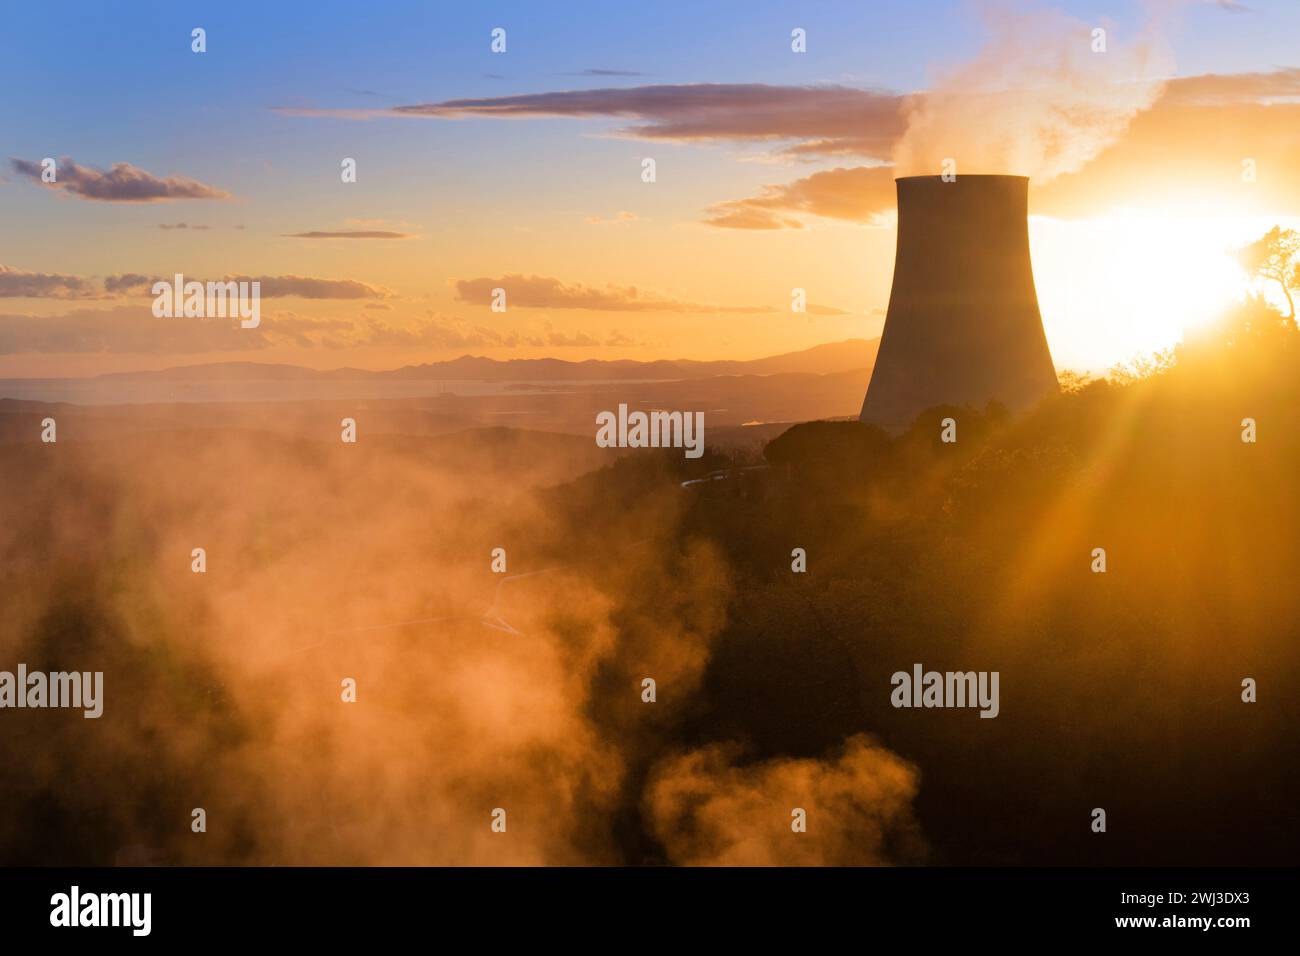 Photographic view of the steam cooling chimney at sunset Stock Photo